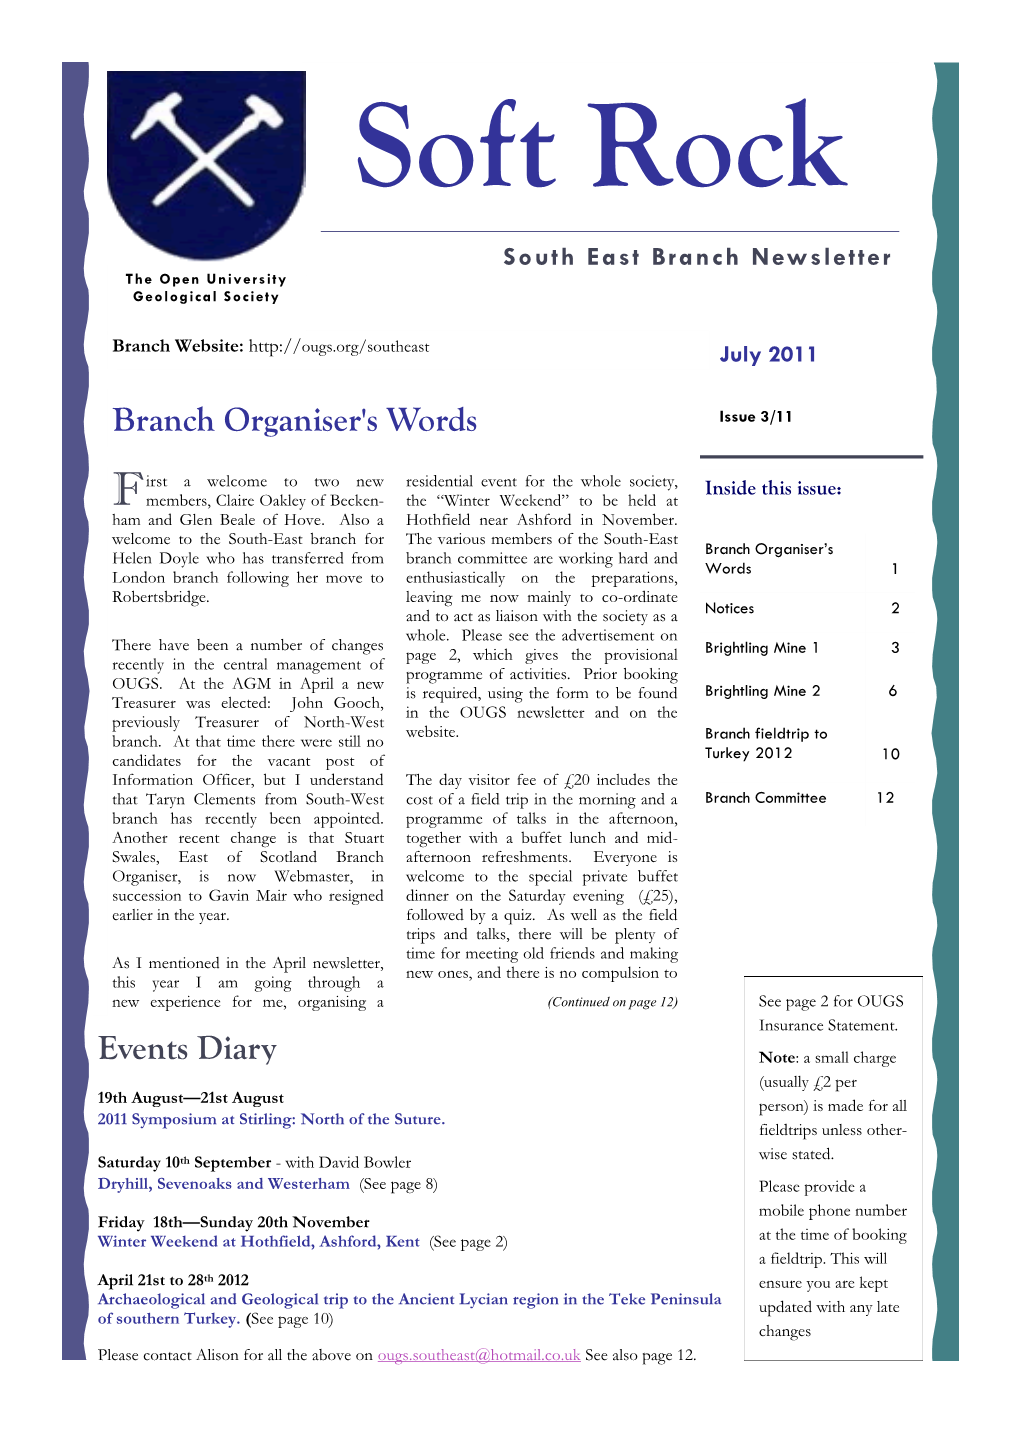 Branch Organiser's Words Events Diary